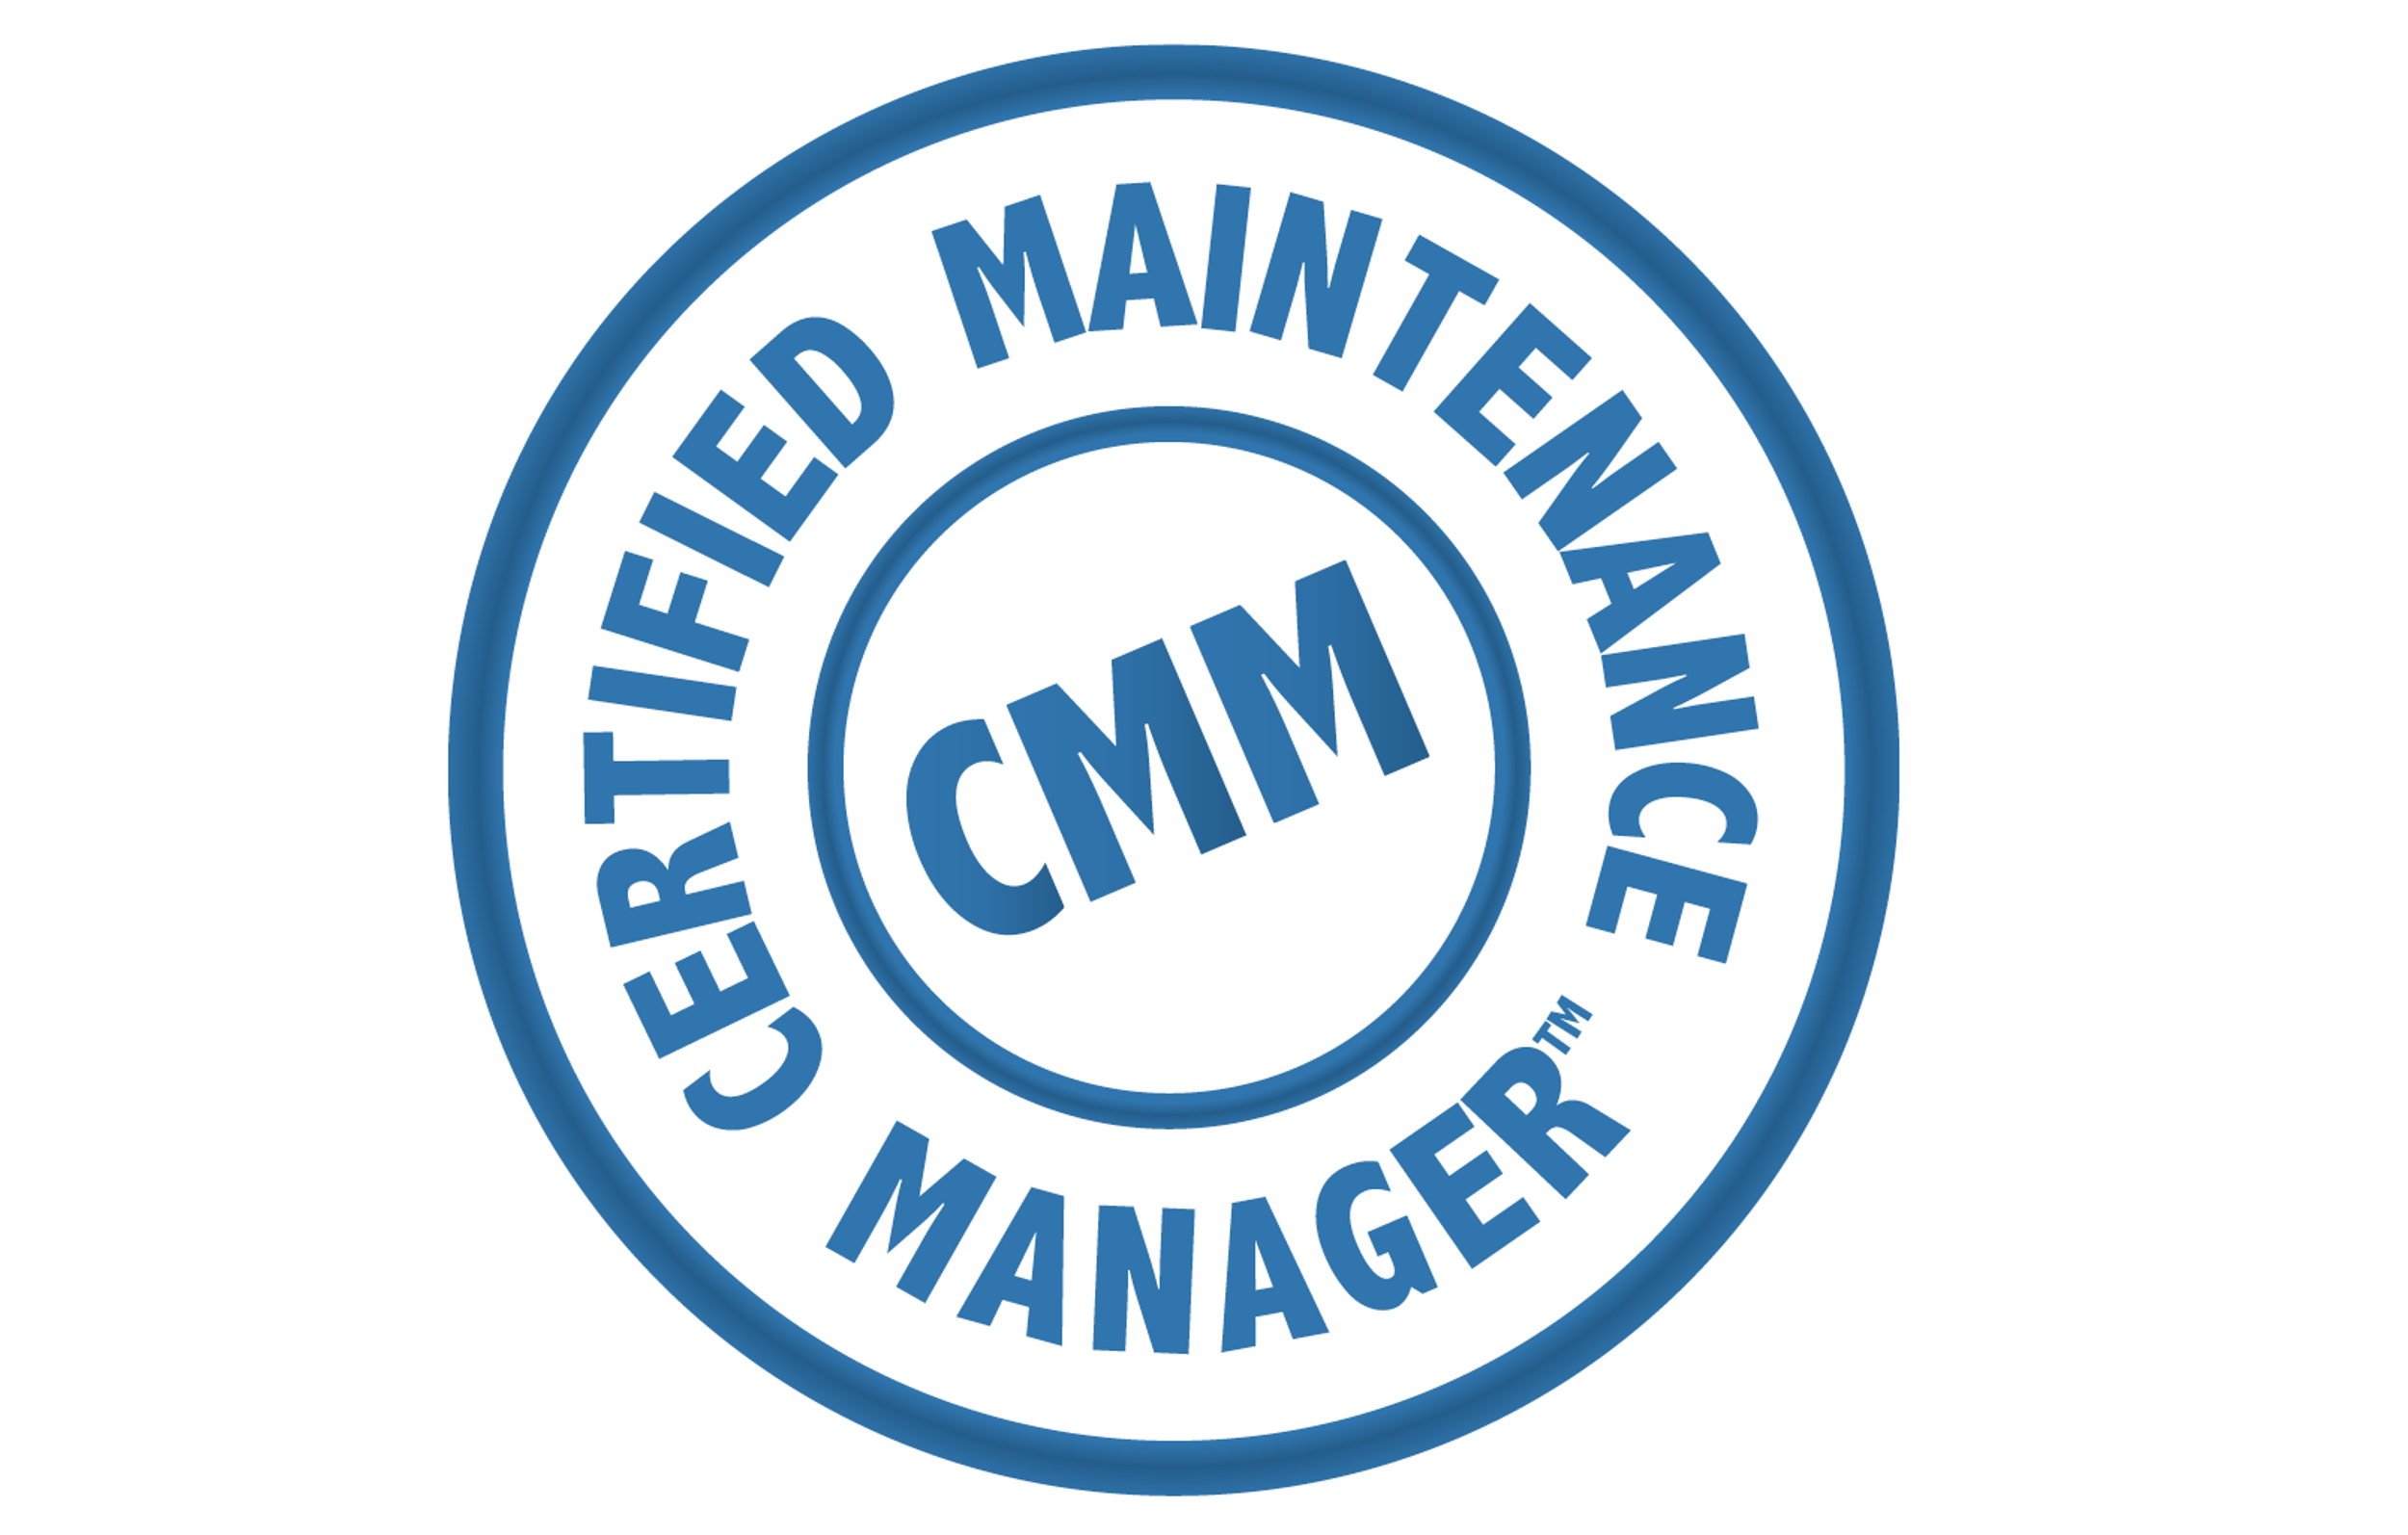 September 2022 Certified Maintenance Manager Workshop by Reliabilityweb.com (Spanish Translation Available)